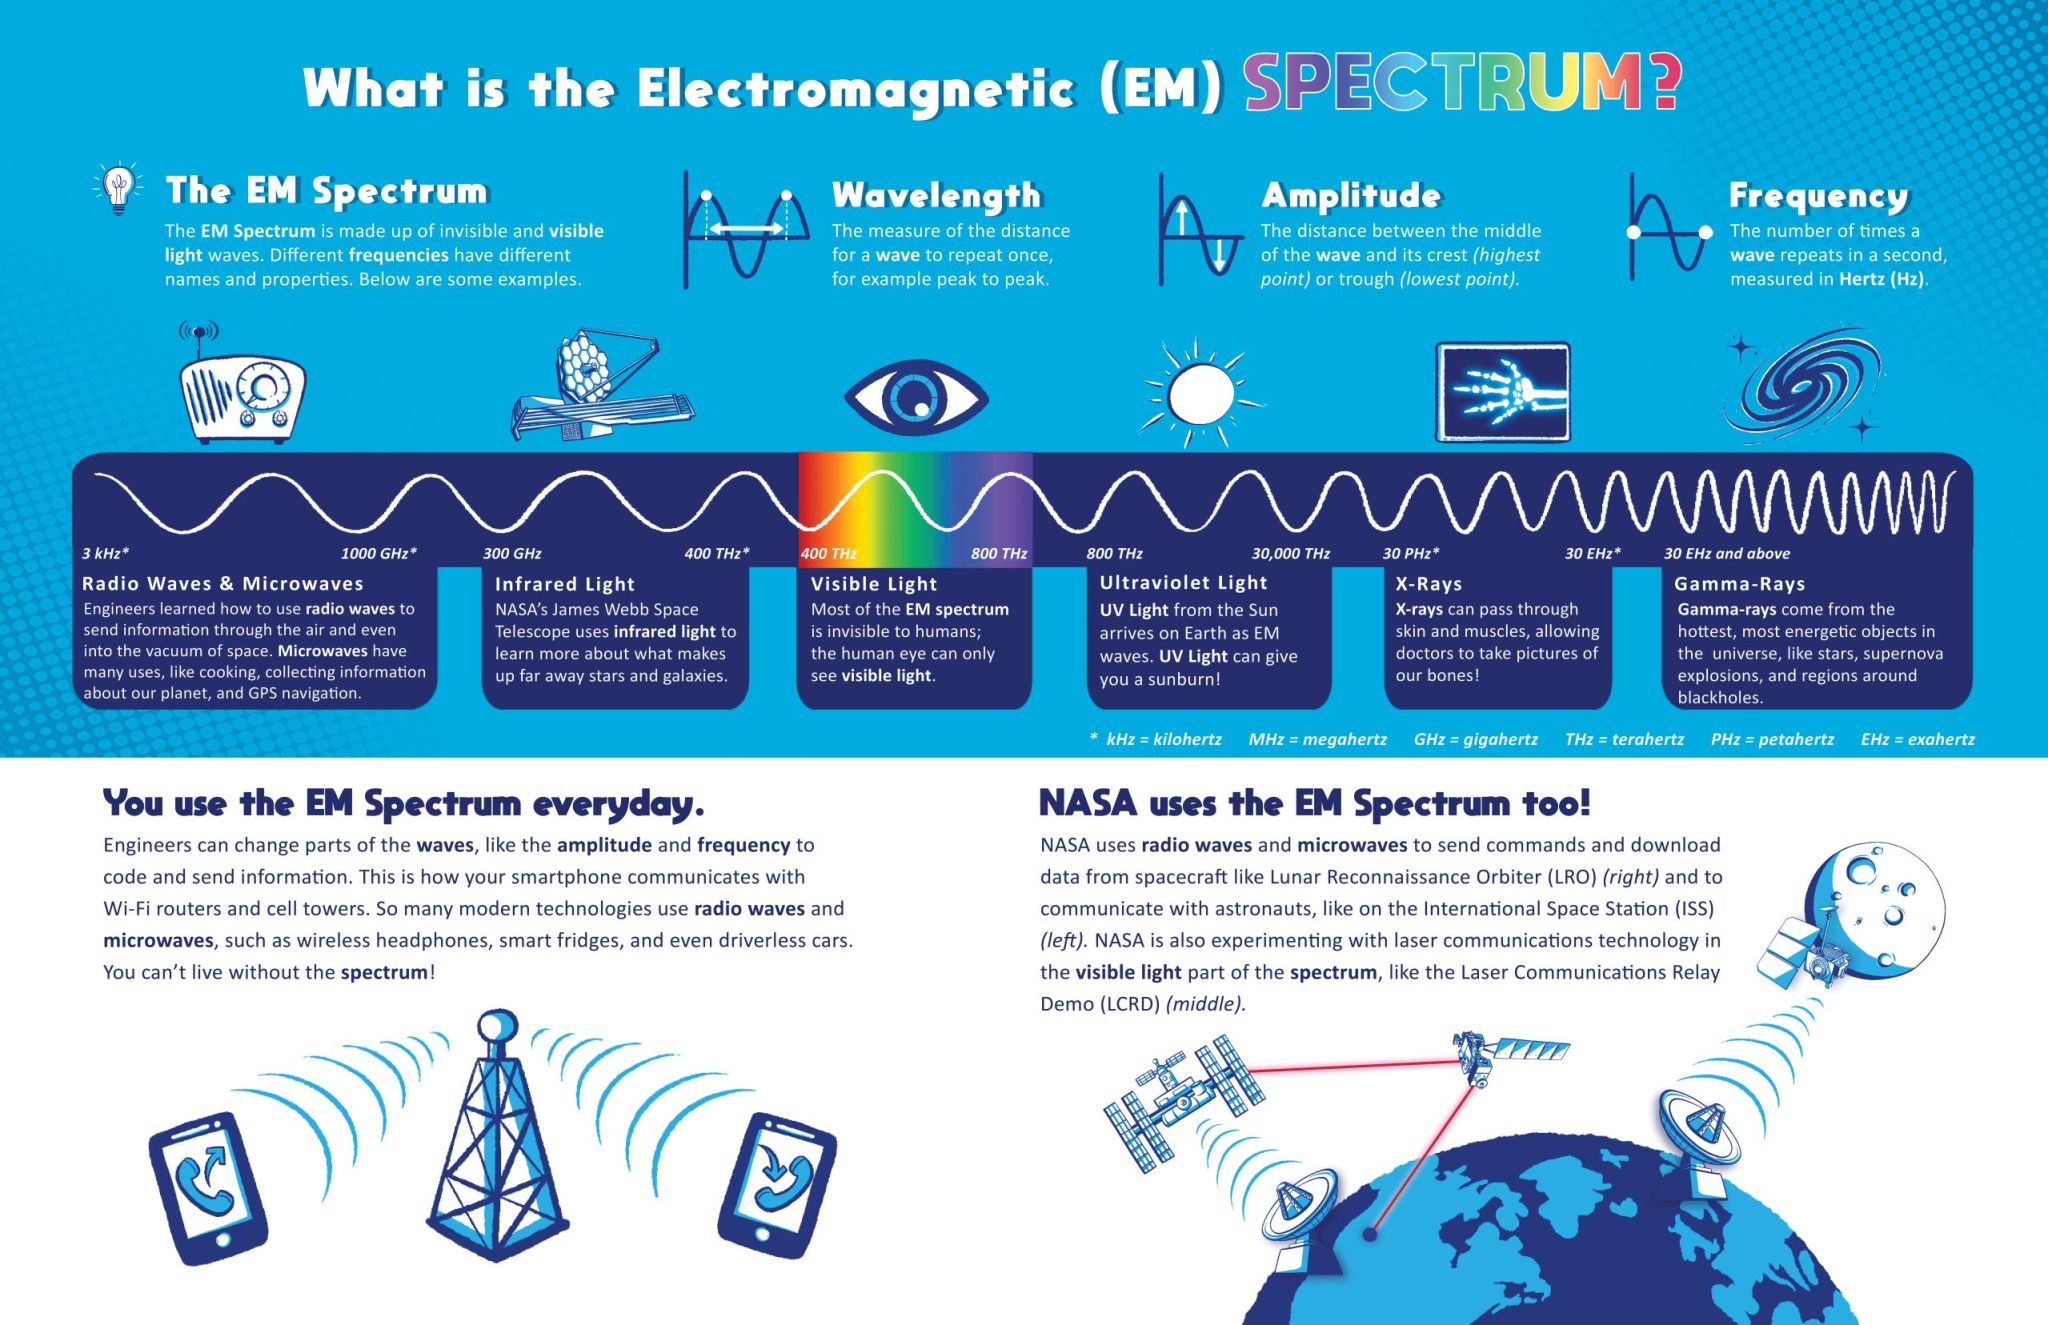 Infographic featuring colorful images relevant to the electromagnetic spectrum.